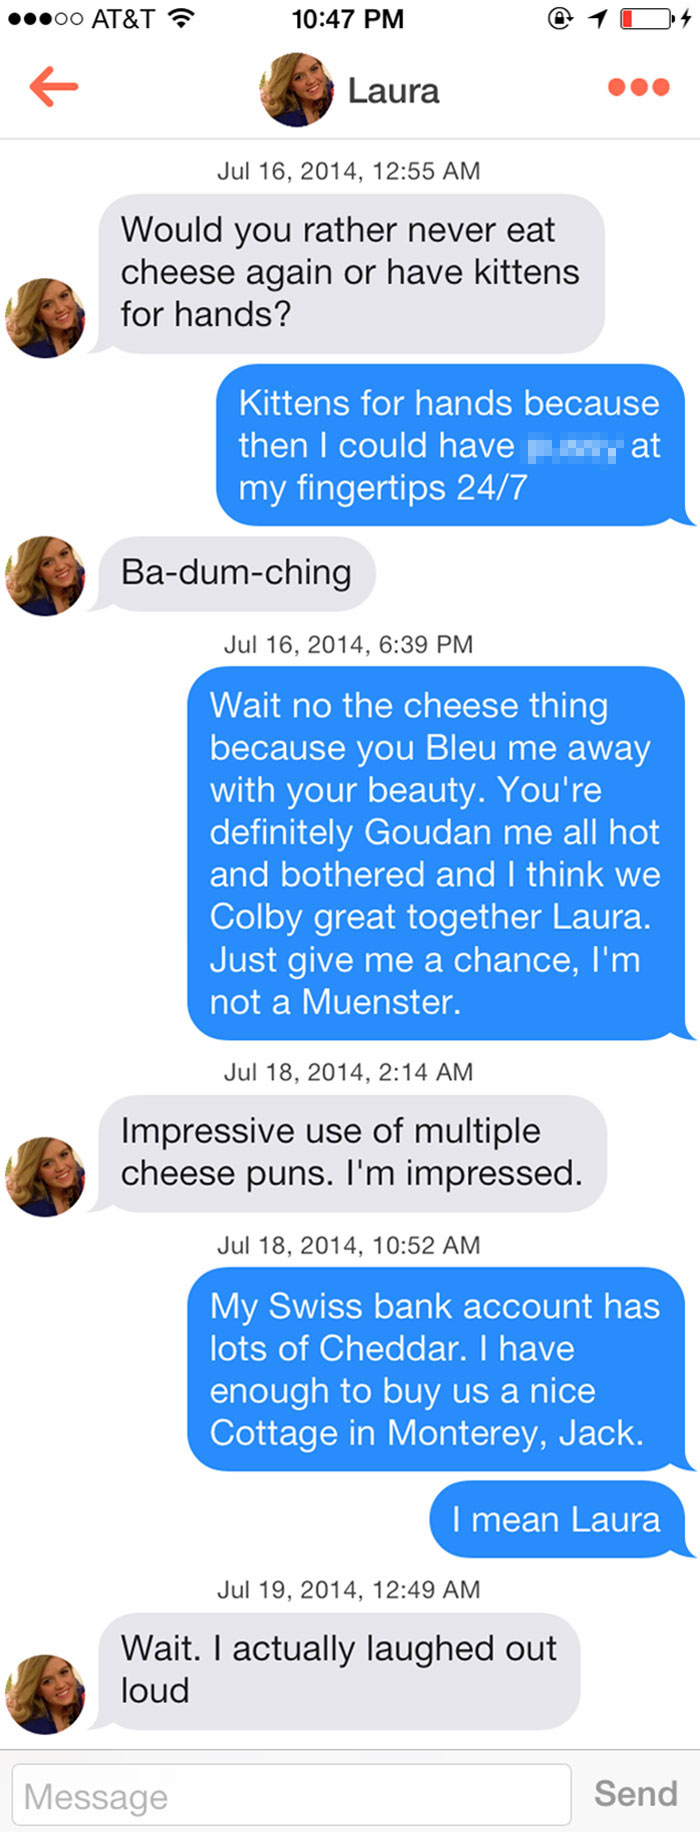 man and woman flirting using puns as pick up lines 